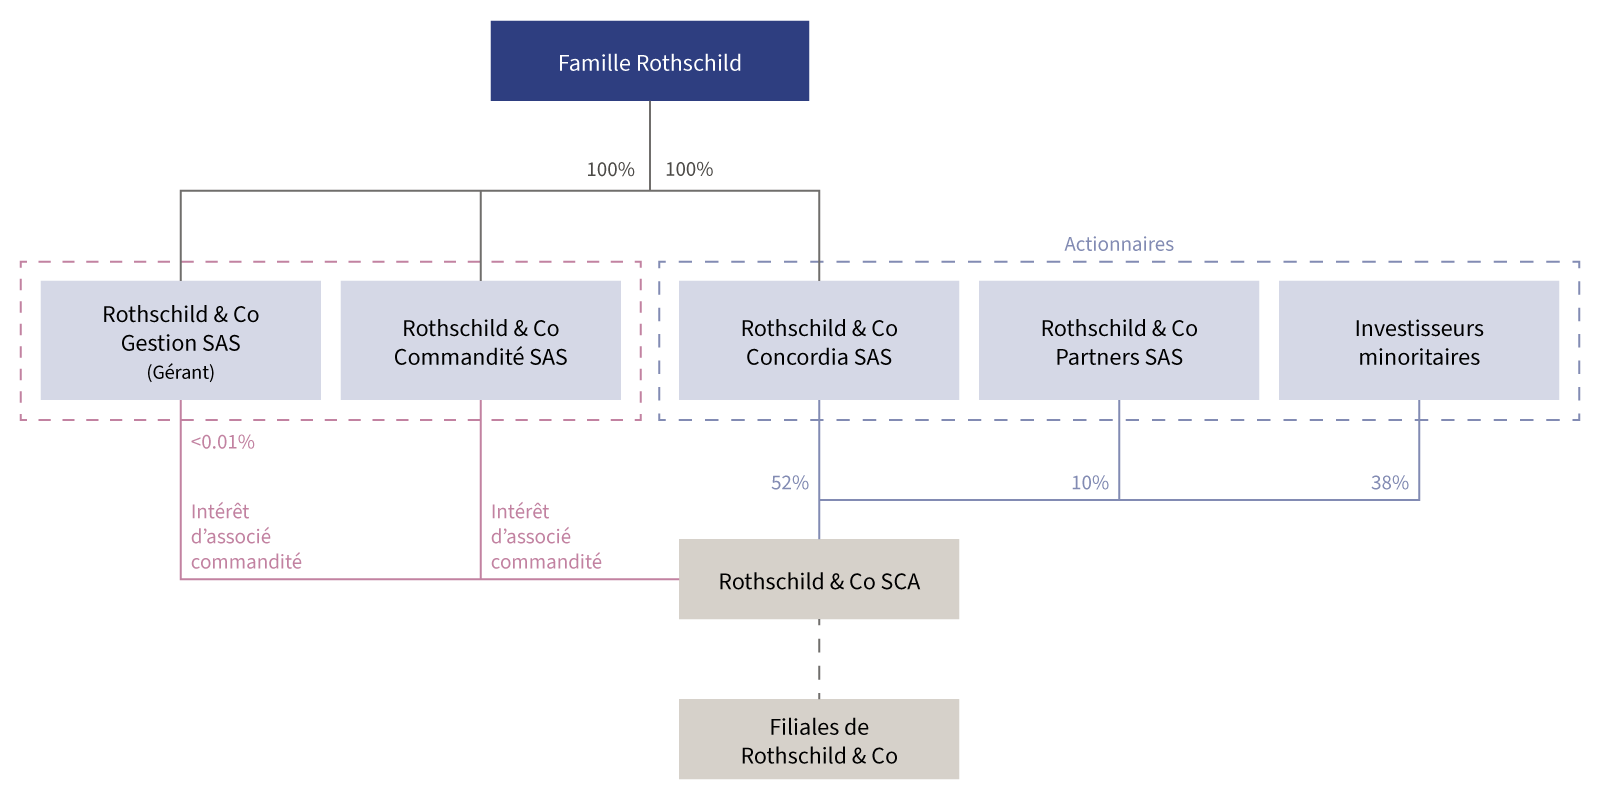 Rothschild & Co SCA structure 